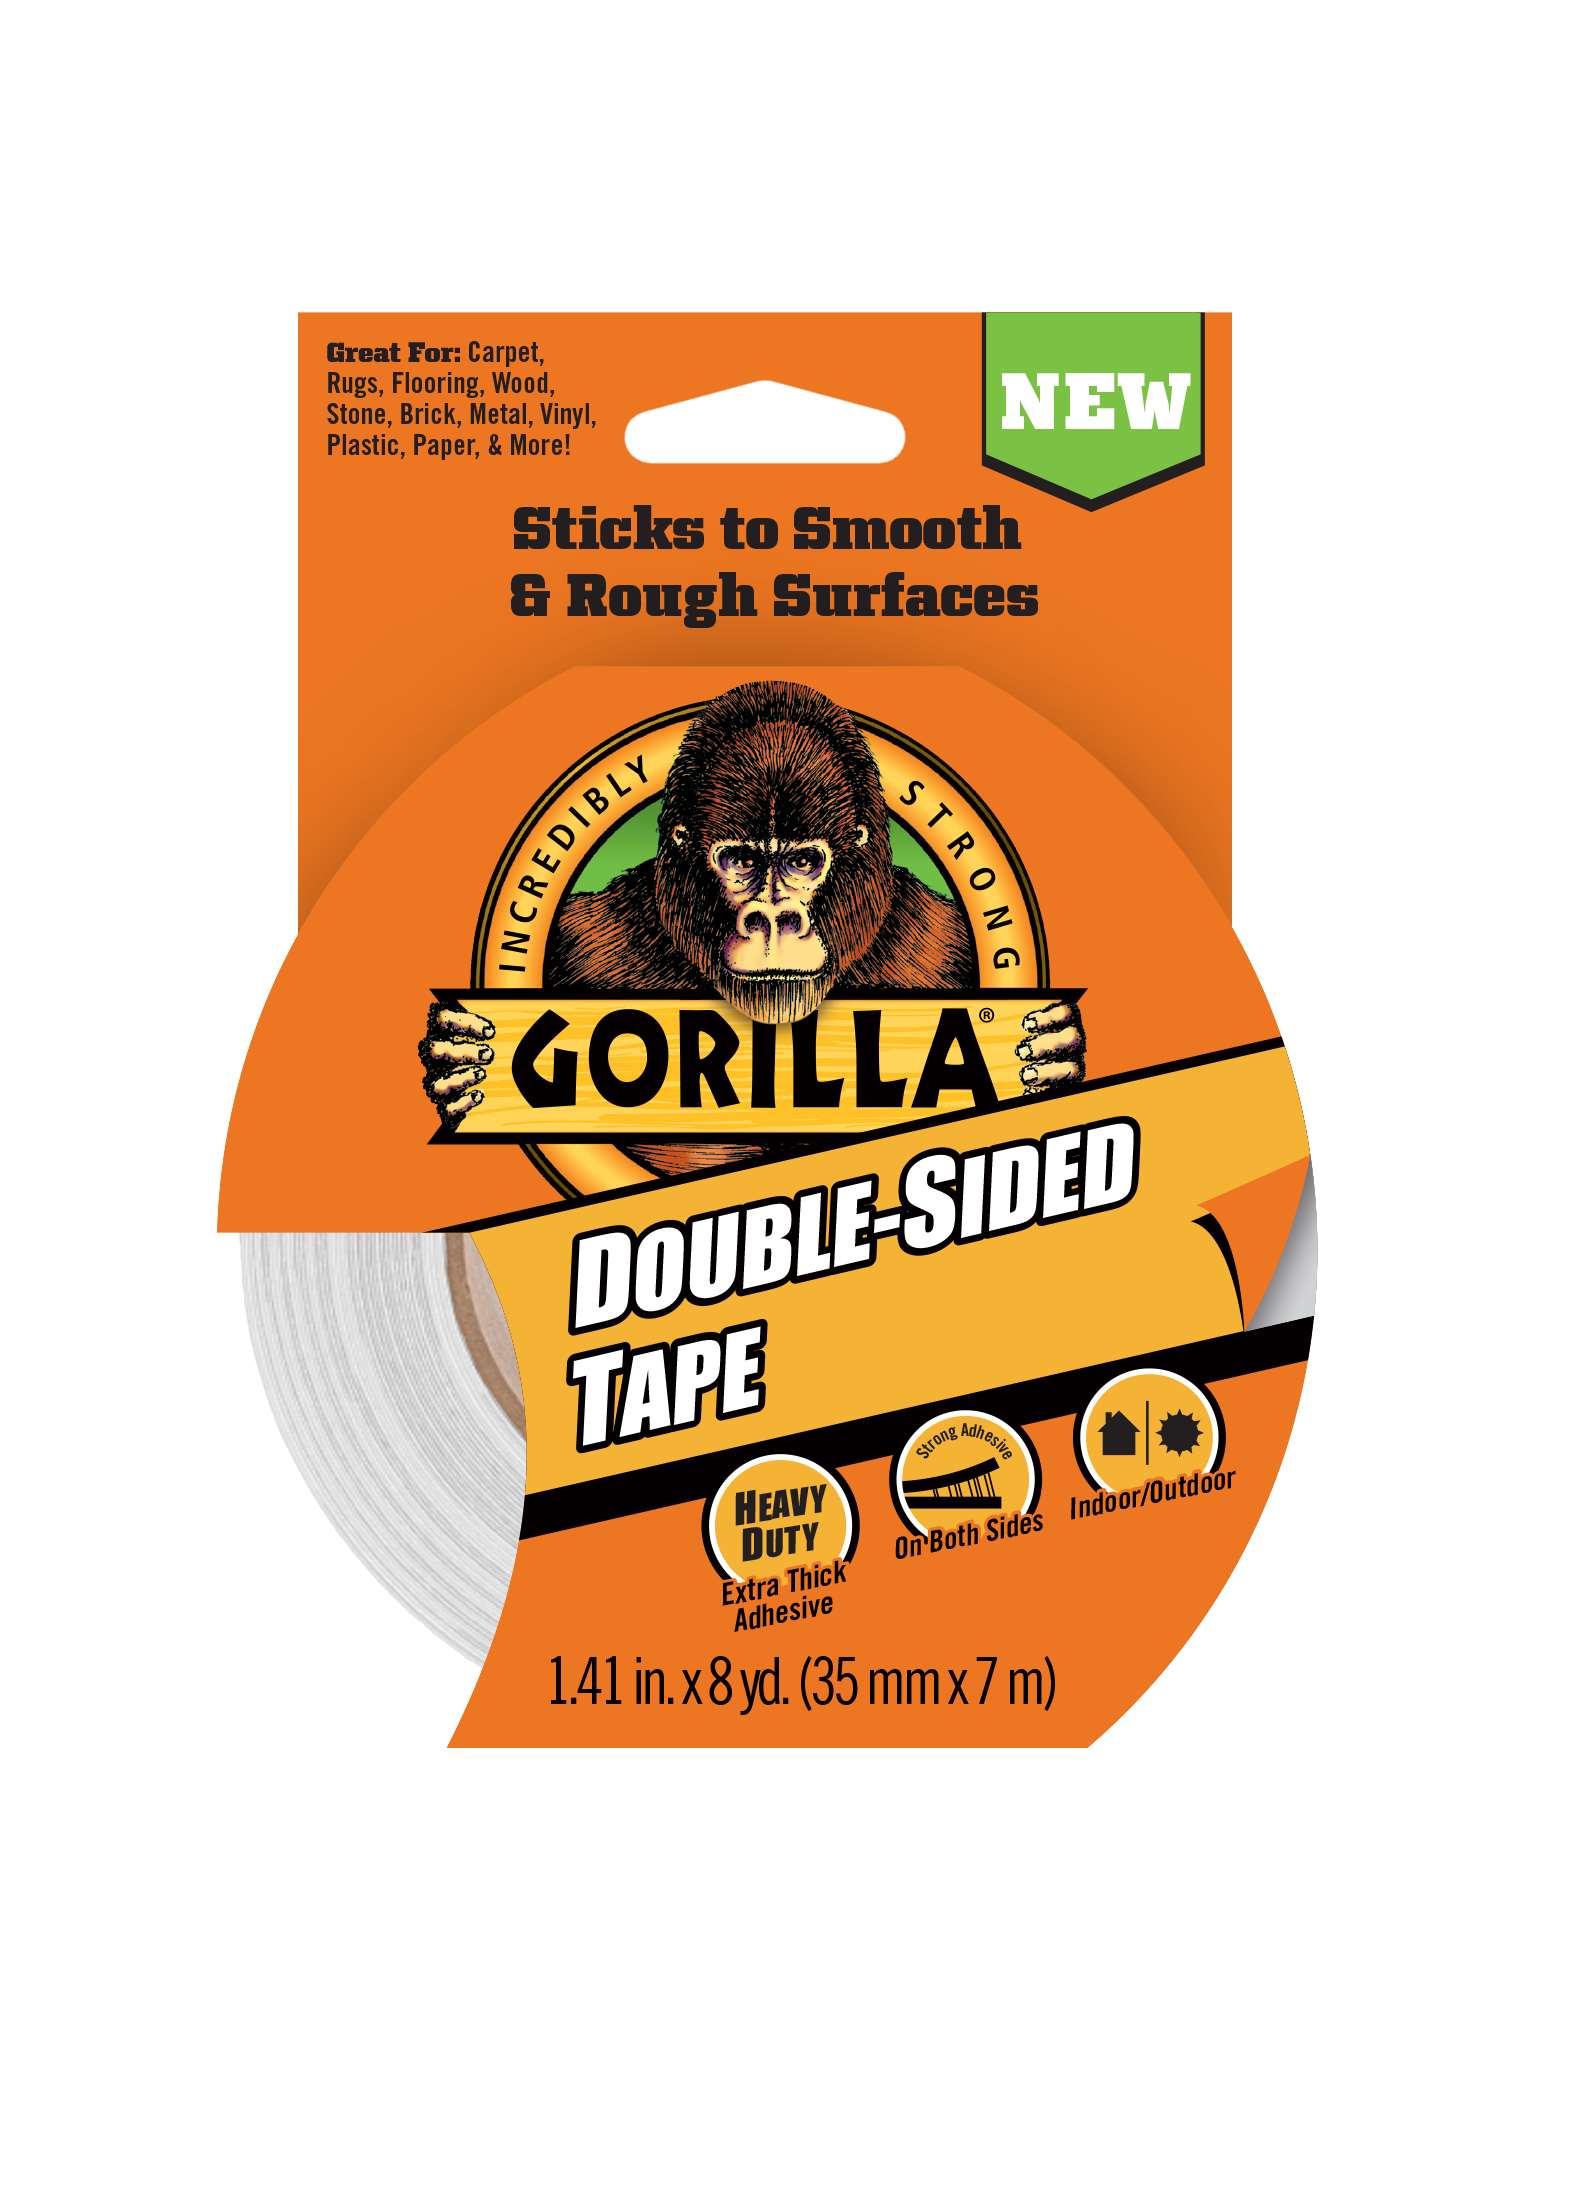 home depot black gorilla double sided tape